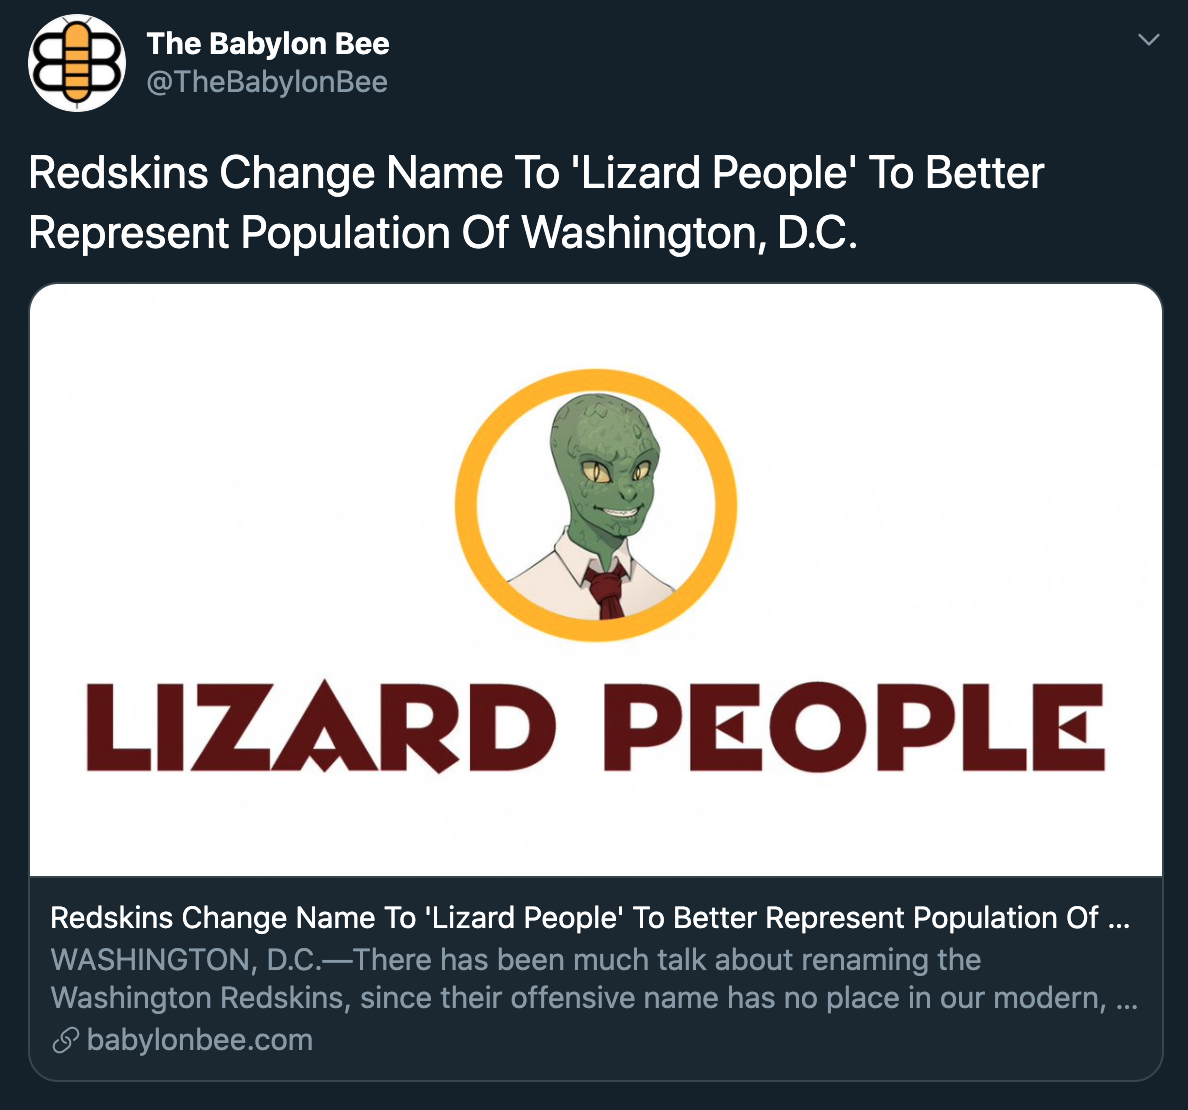 The Babylon Bee Redskins Change Name To 'Lizard People' To Better Represent Population Of Washington, D.C. Lizard People Redskins Change Name To 'Lizard People' To Better Represent Population of ... Washington, D.C.There has been much talk about renaming…